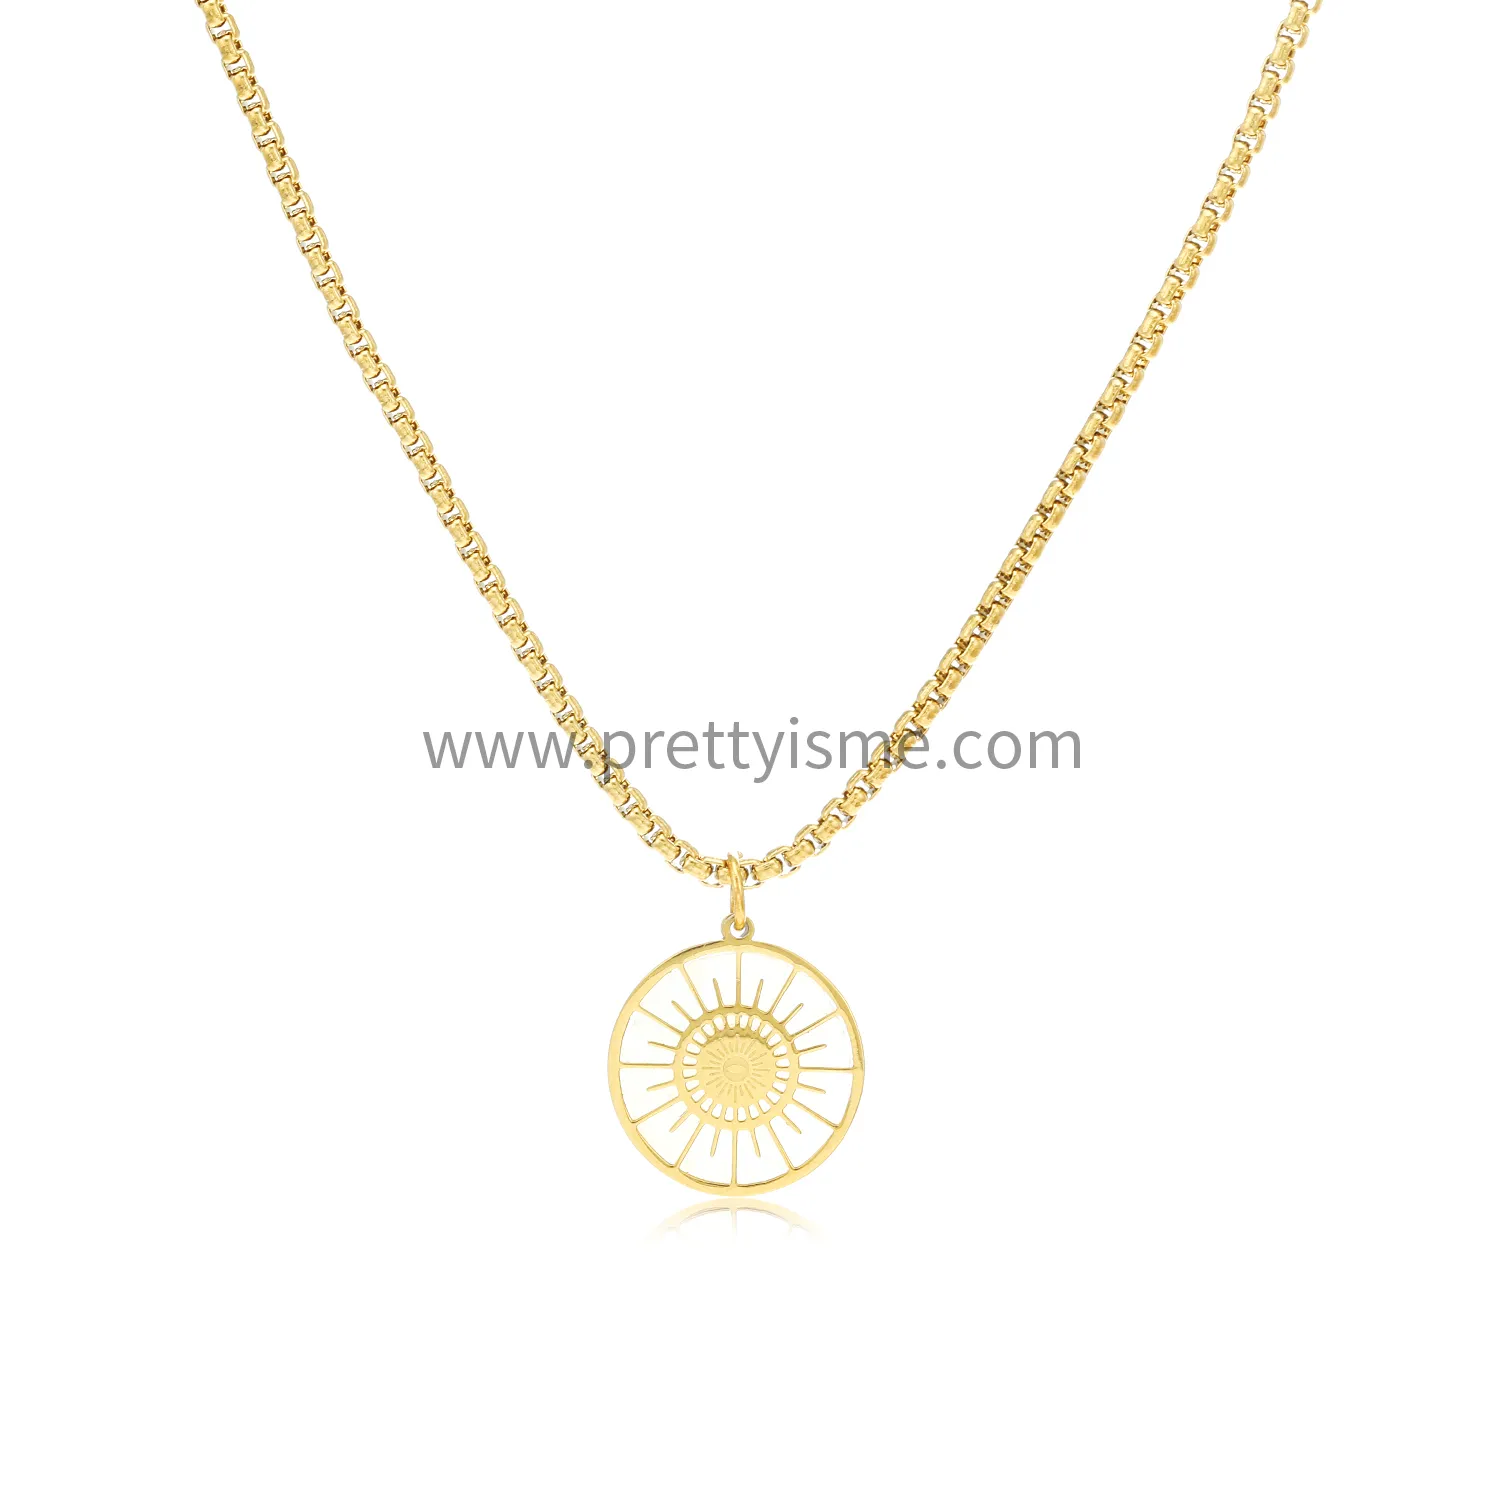 Simple Classic Stainless Steel 18k Gold Plated Thin Necklace with Delicate Pendant (5).webp